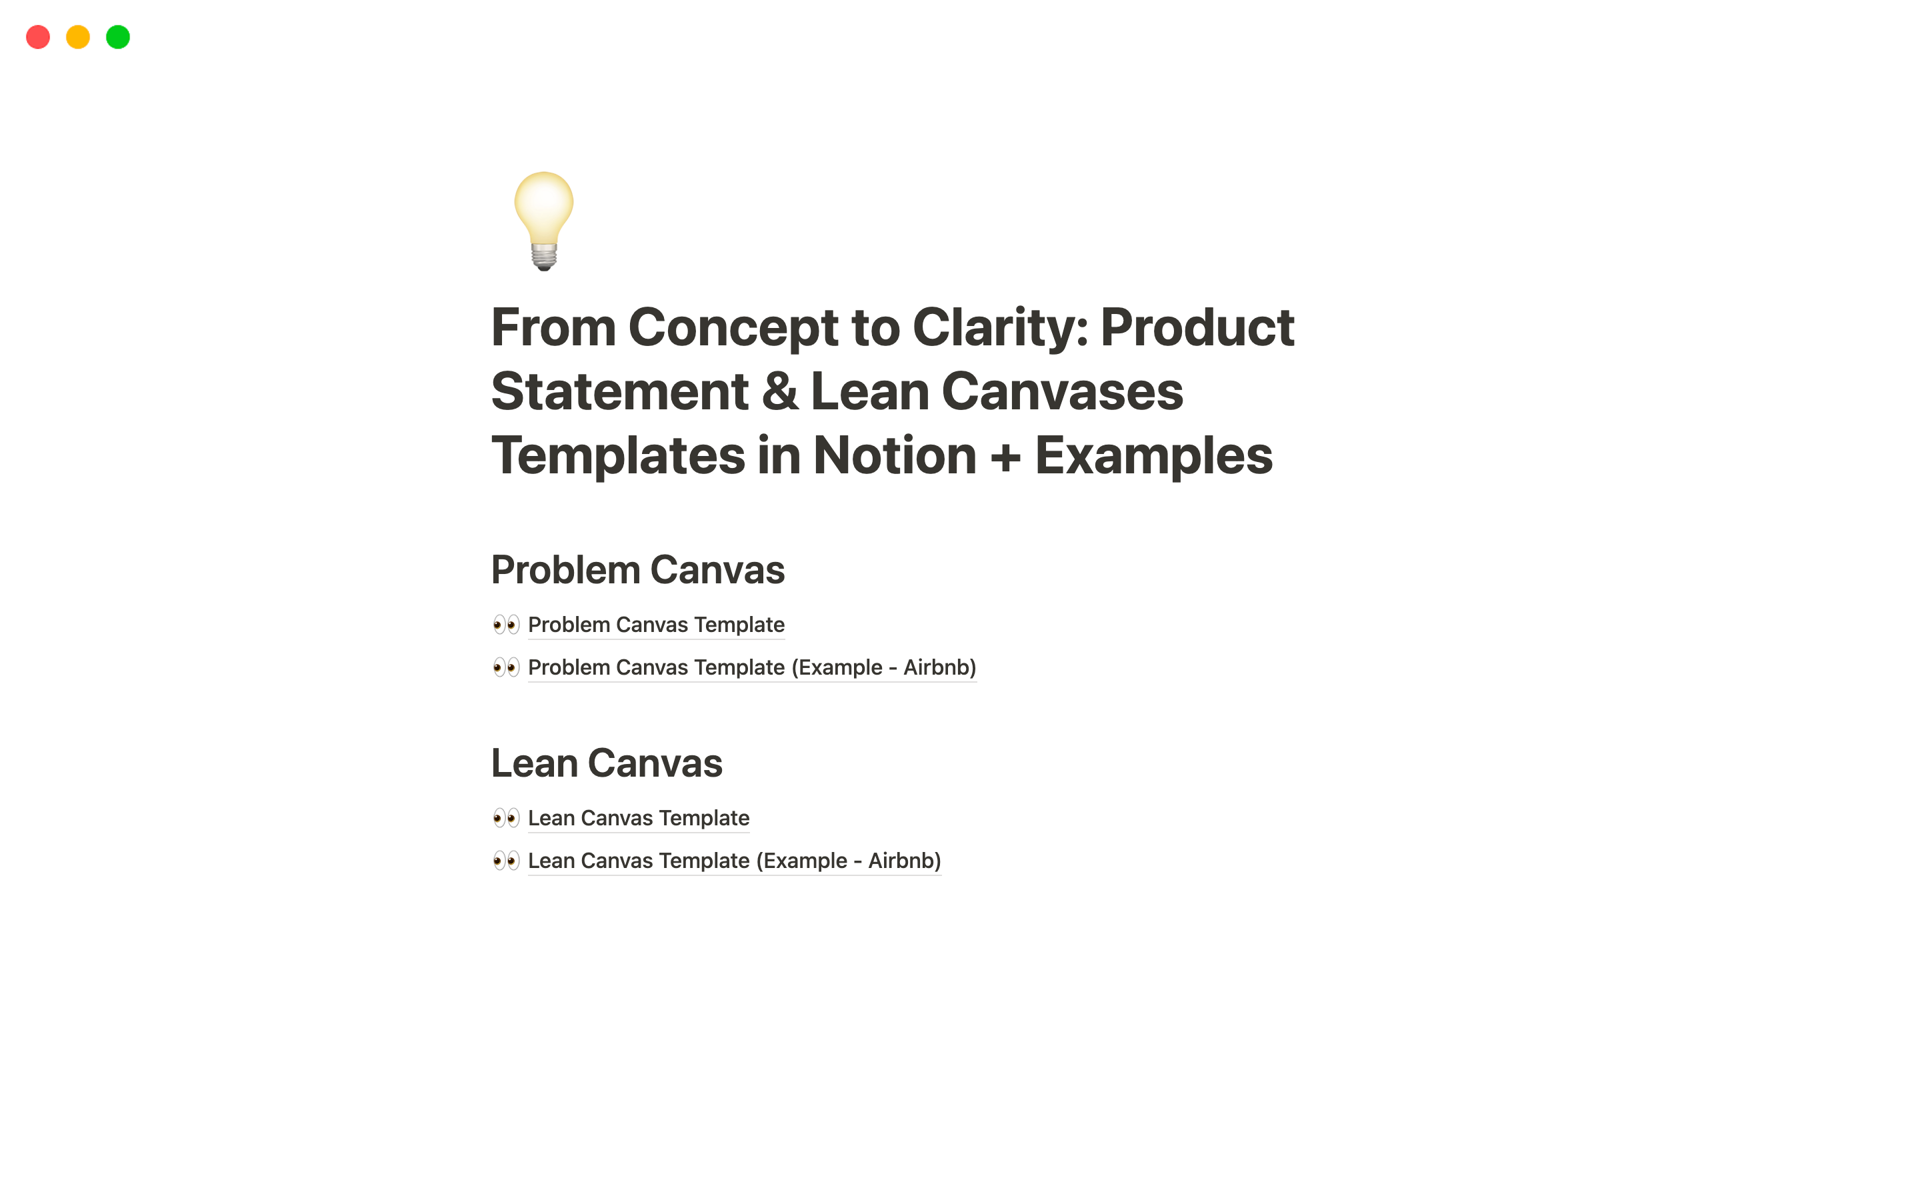 A template preview for Product Statement & Lean Canvases with Examples